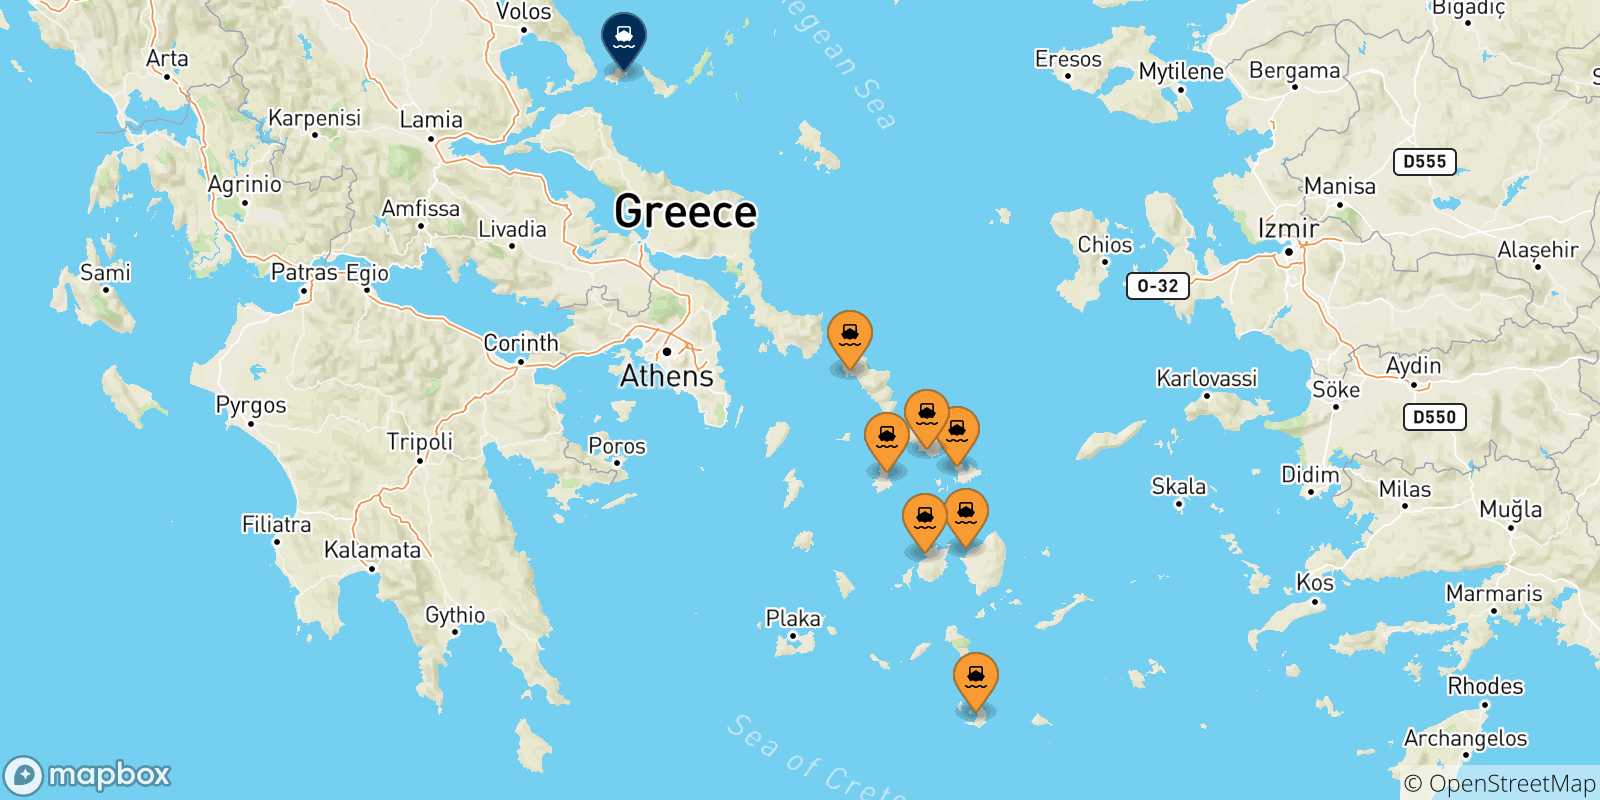 Map of the possible routes between Cyclades Islands and Sporades Islands